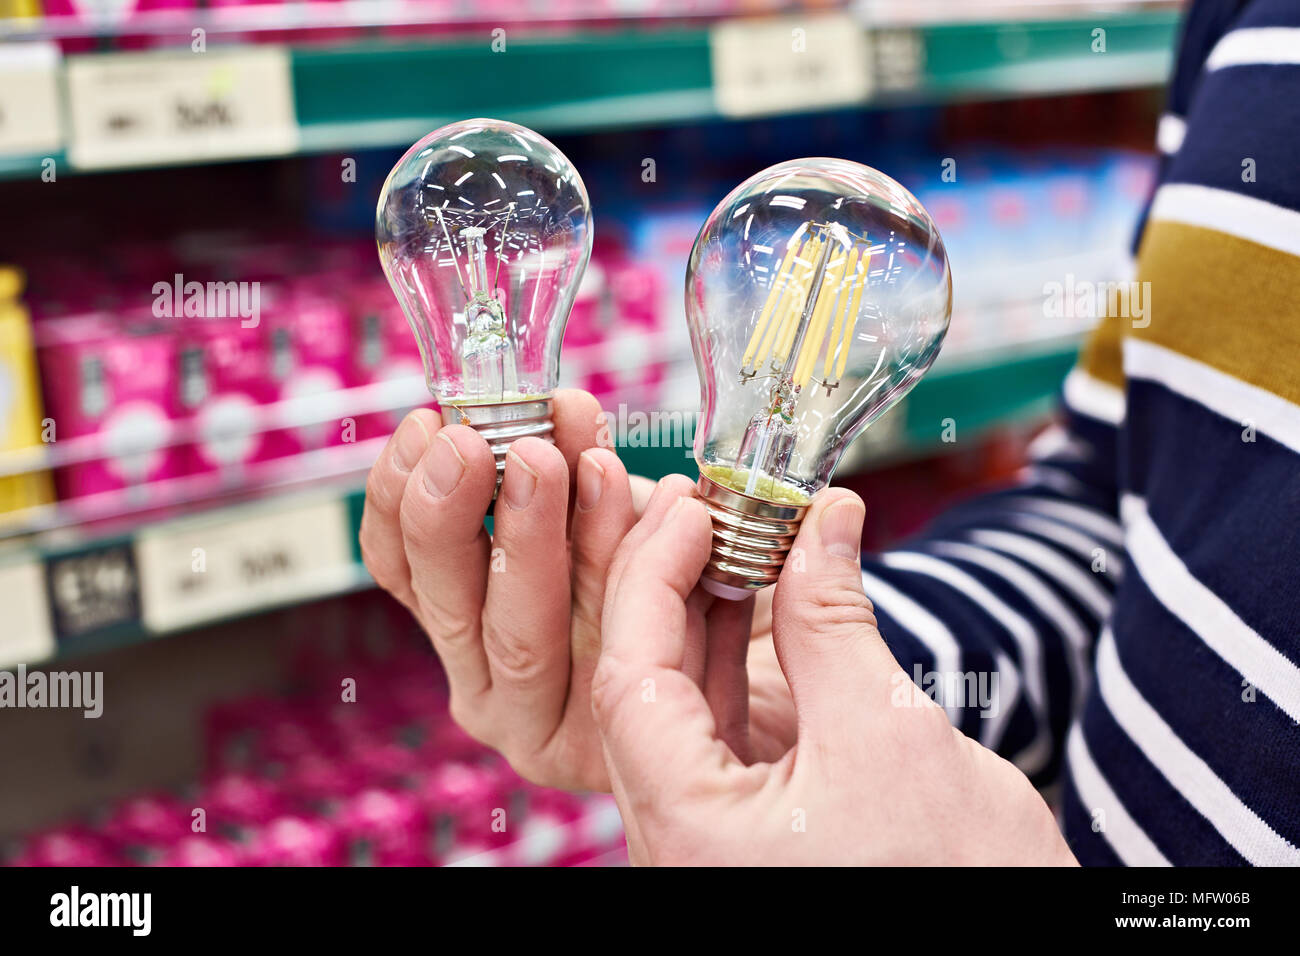 LED and incandescent lamp in the hands of the buyer in the store Stock Photo